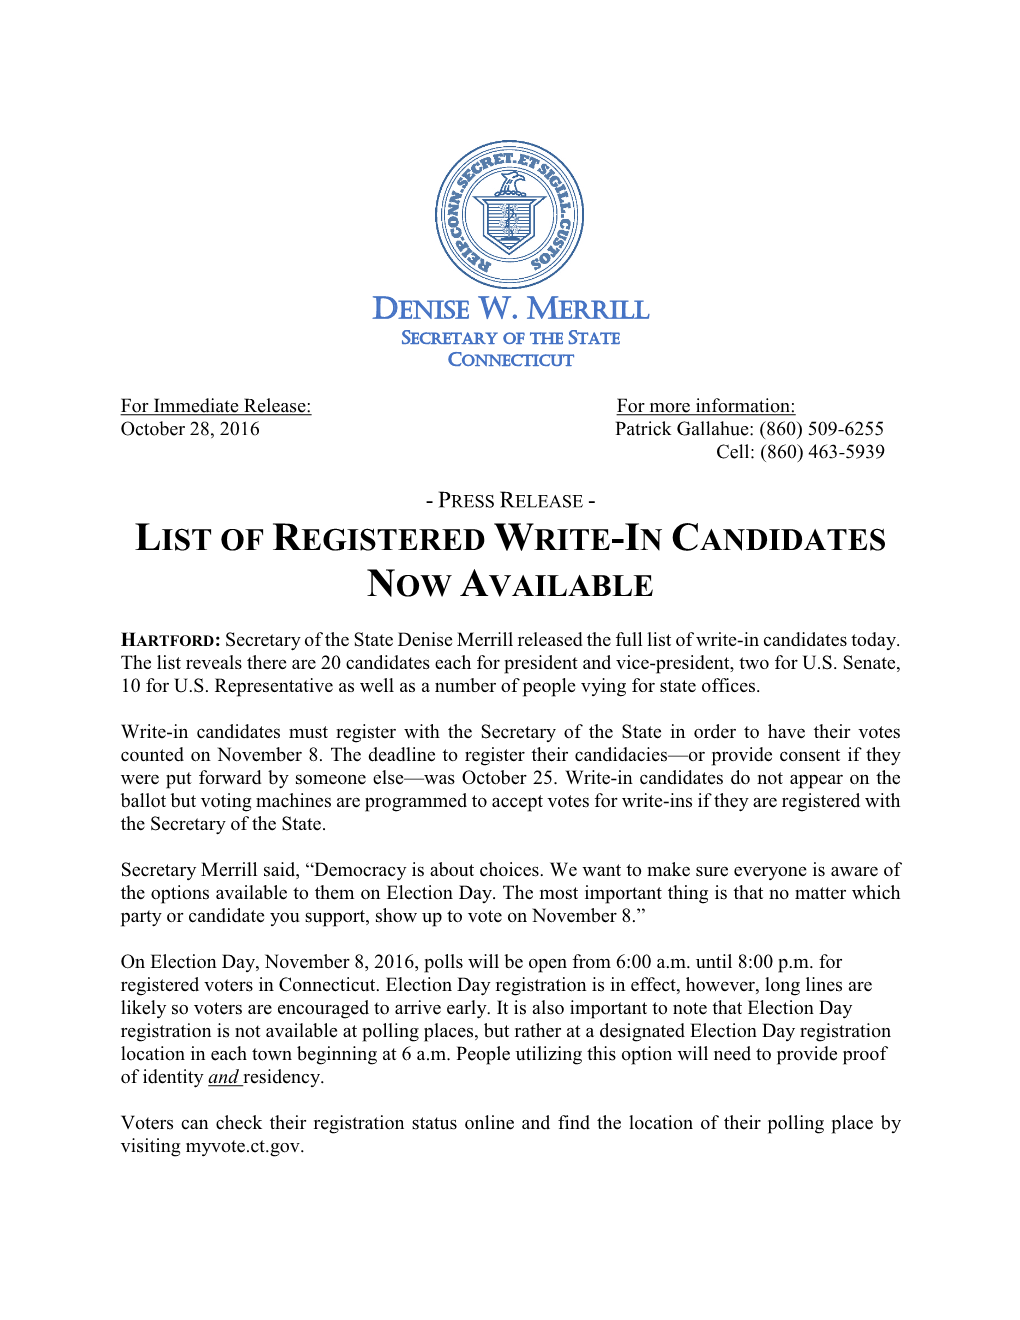 List of Registered Write-In Candidates Now Available